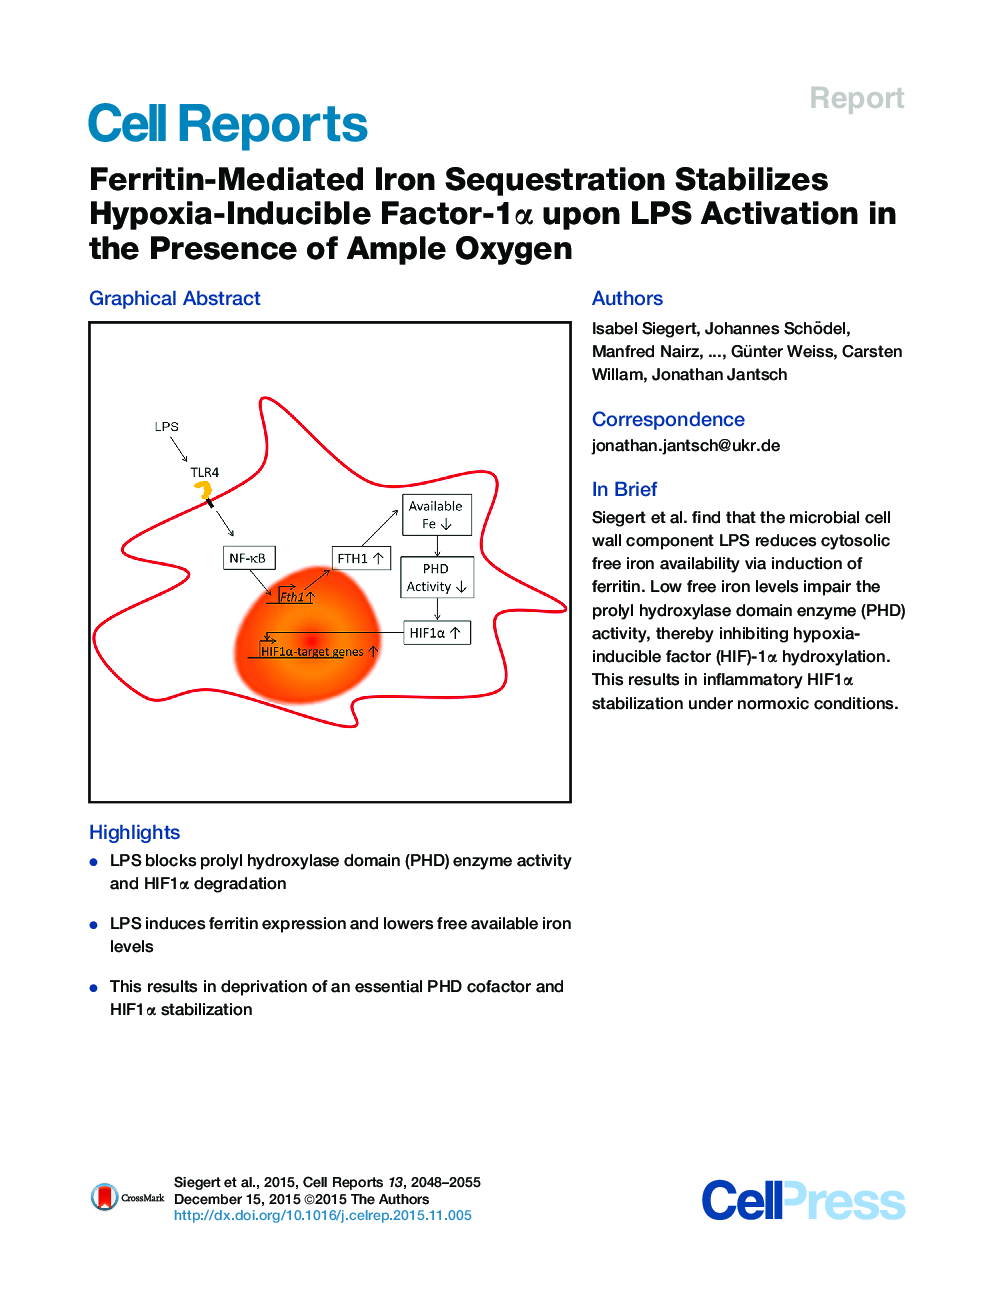 Ferritin-Mediated Iron Sequestration Stabilizes Hypoxia-Inducible Factor-1α upon LPS Activation in the Presence of Ample Oxygen 